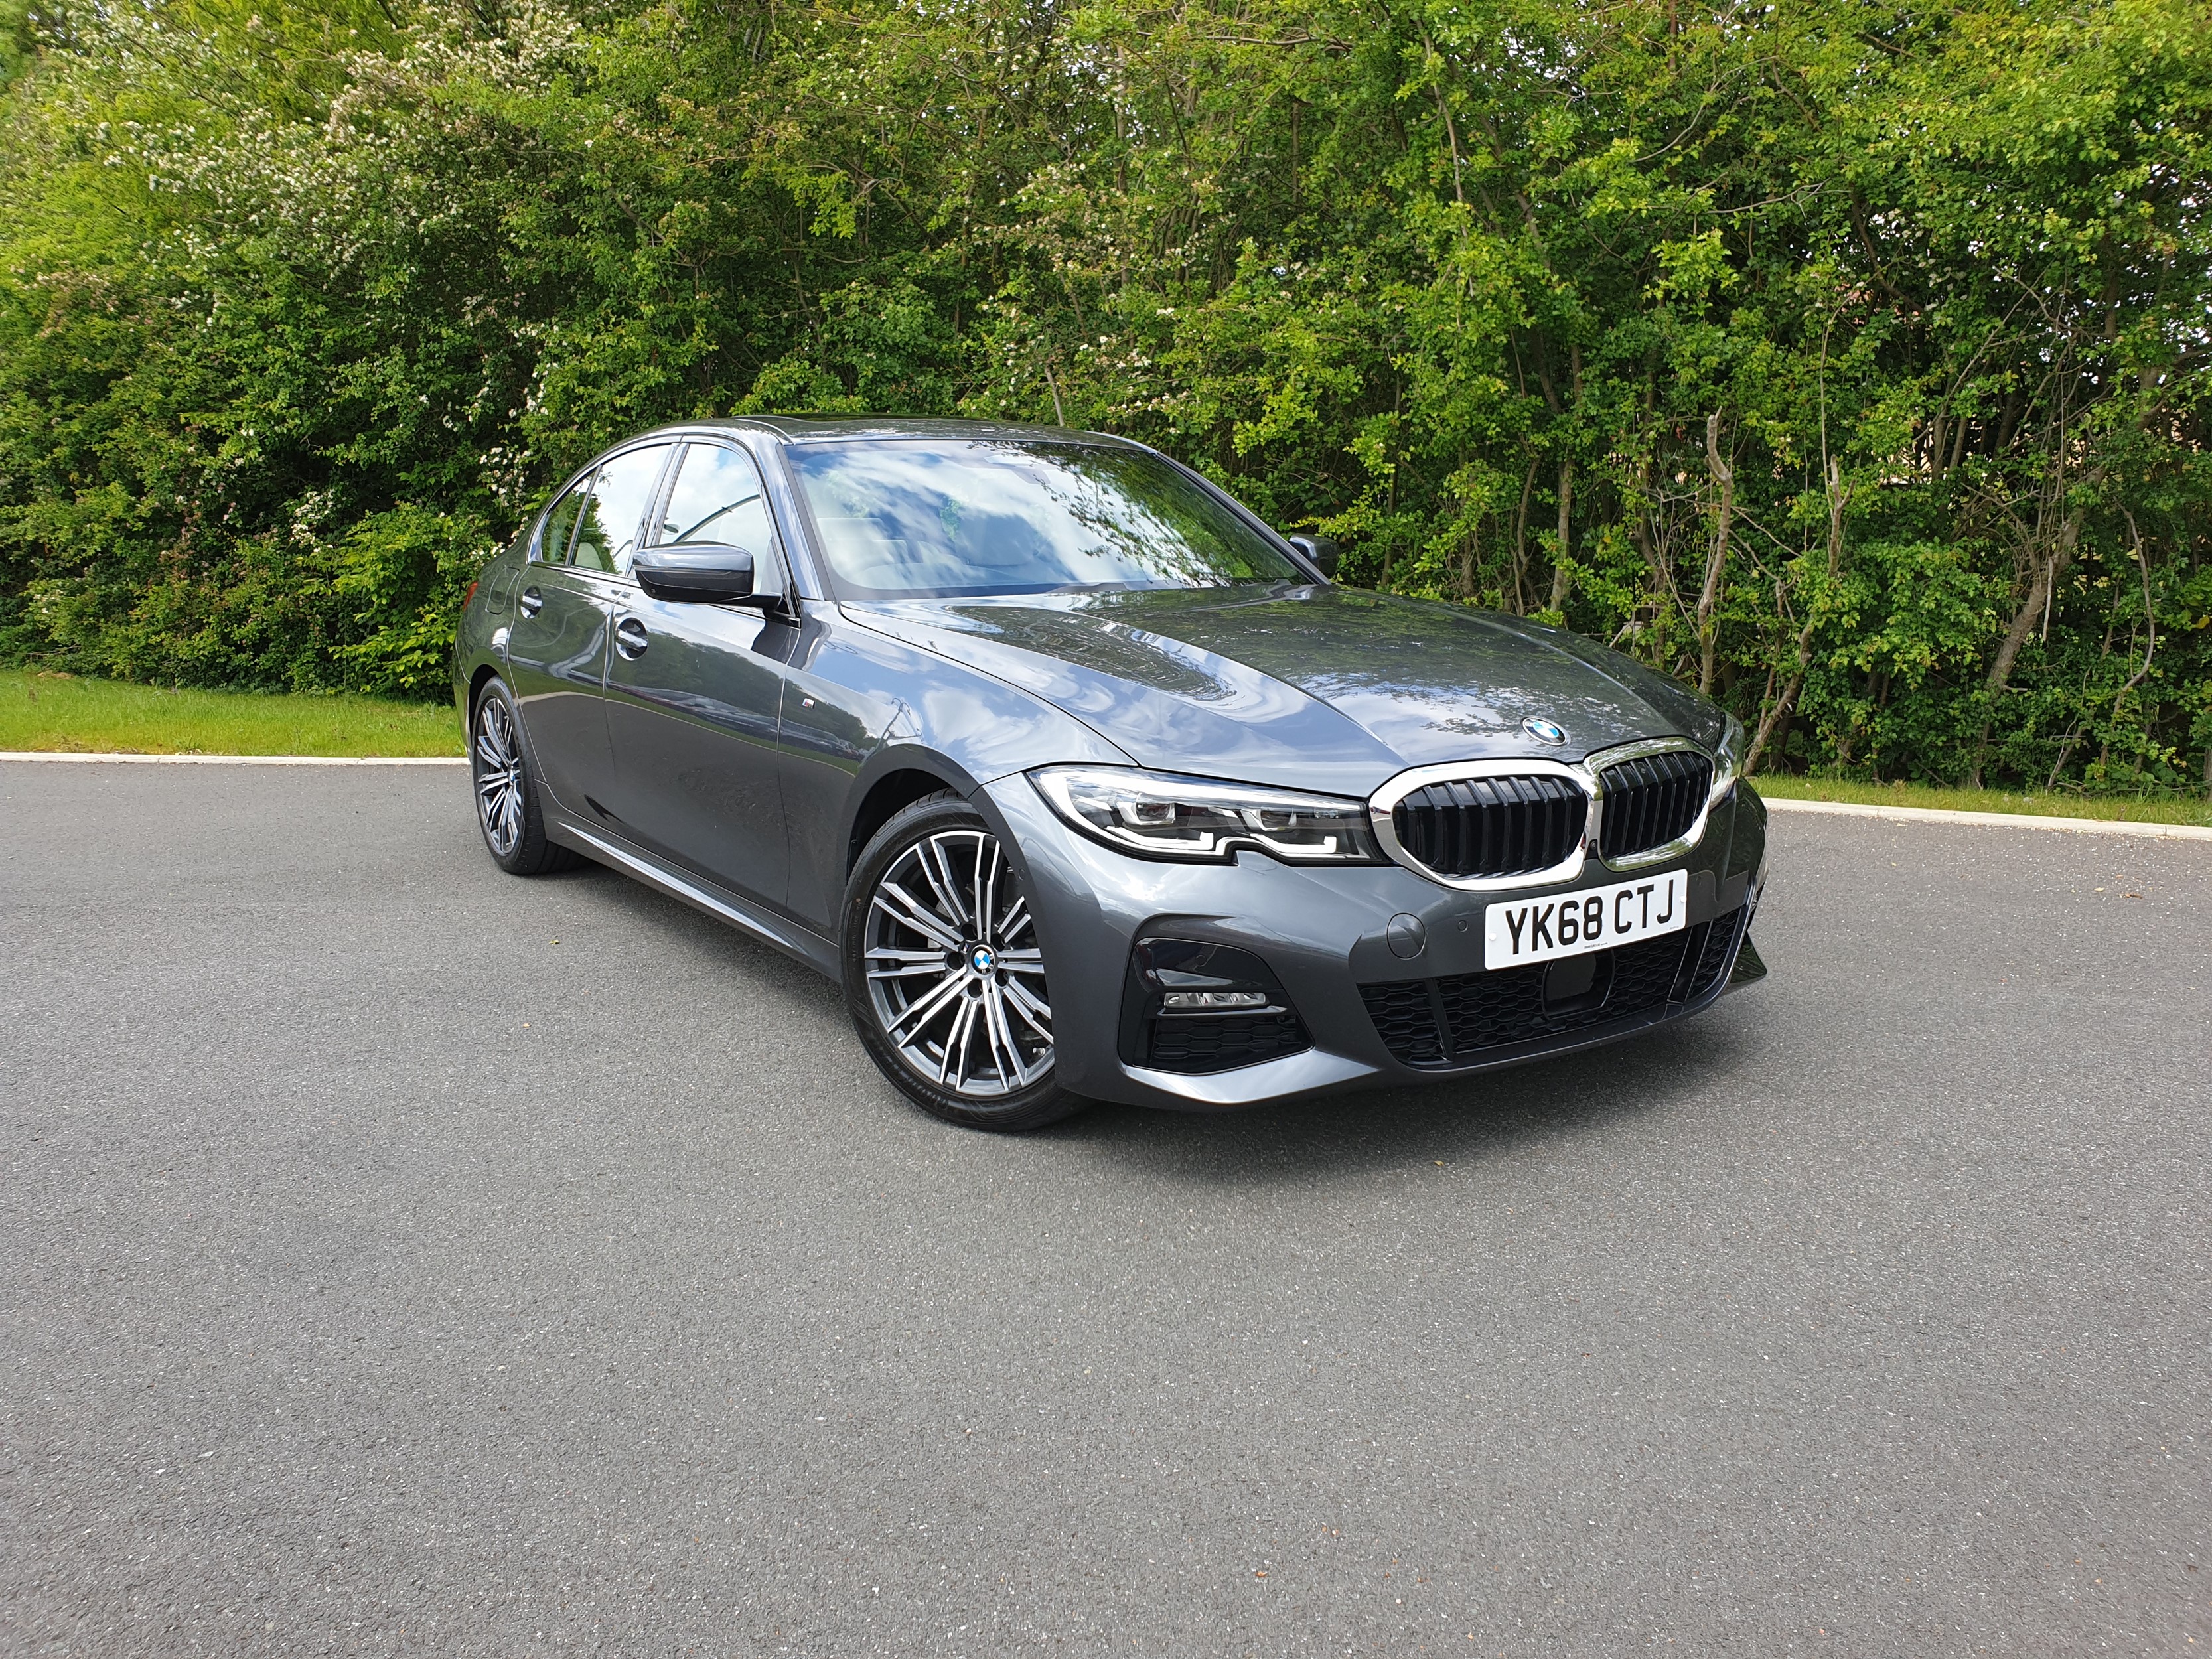 In beweging Voel me slecht pil BMW 3 Series 320d M Sport long-term test review | Company Car Reviews